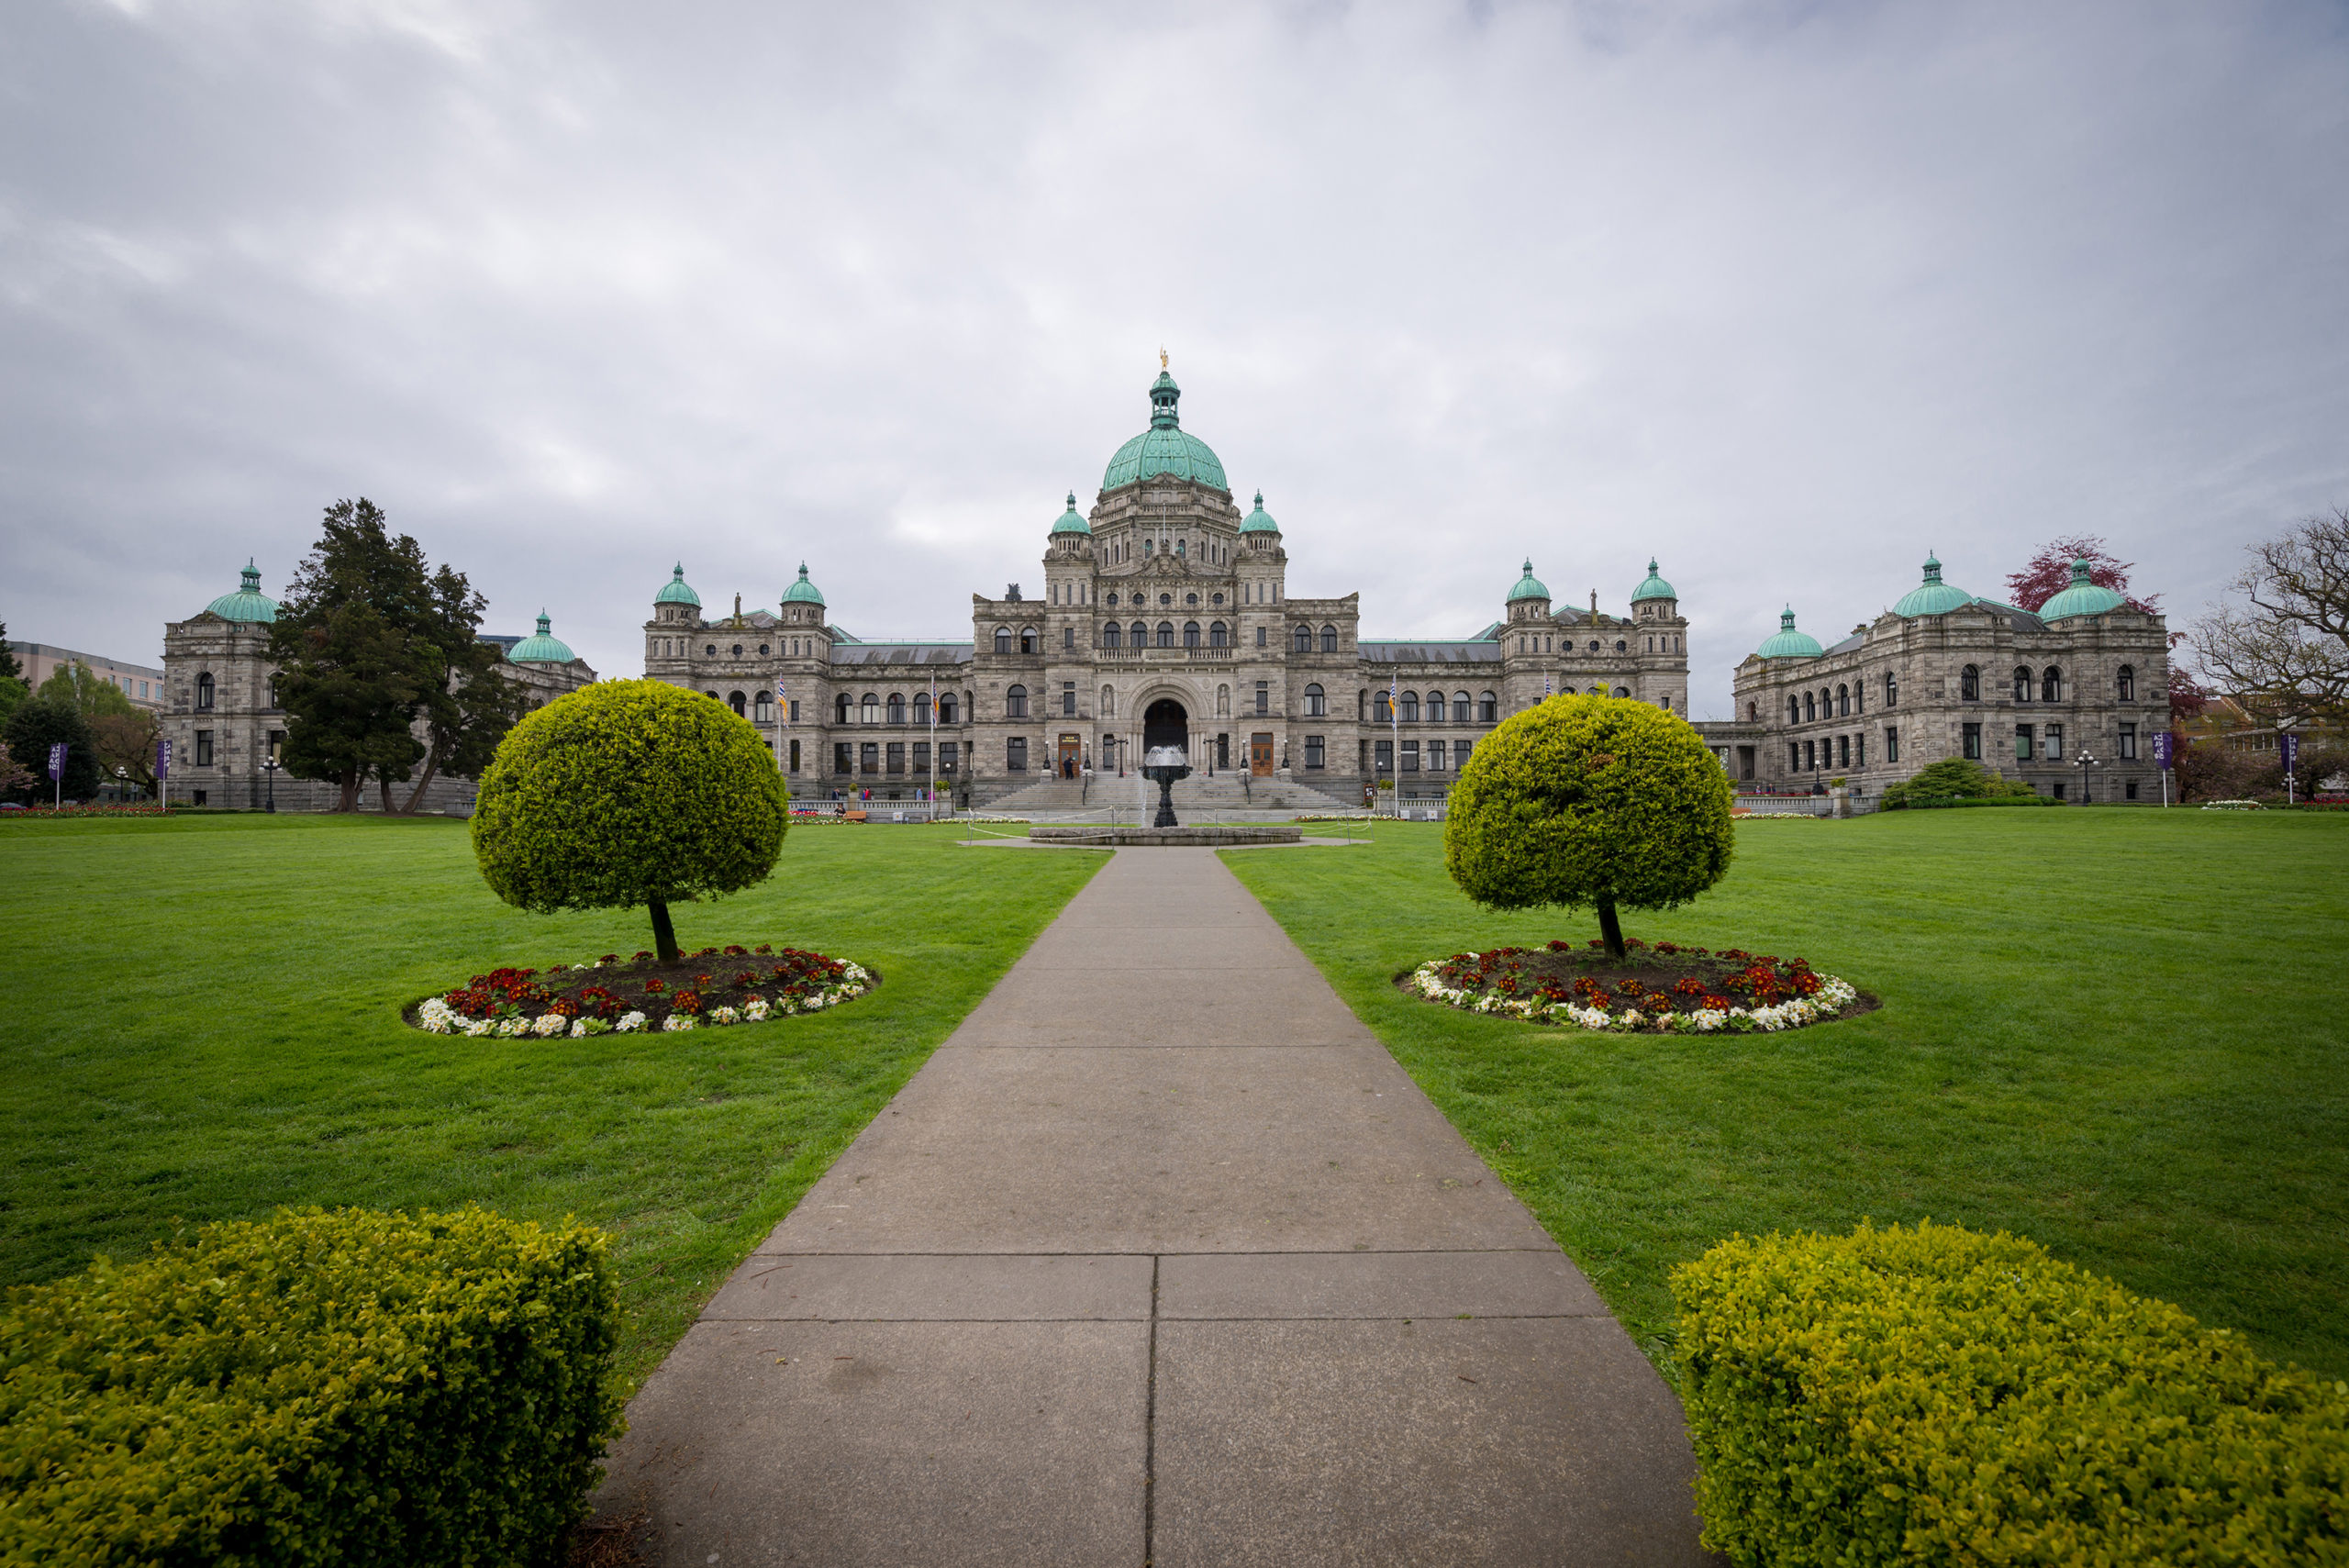 B.C. expands its Speculation and vacancy tax, adds more municipalities in province